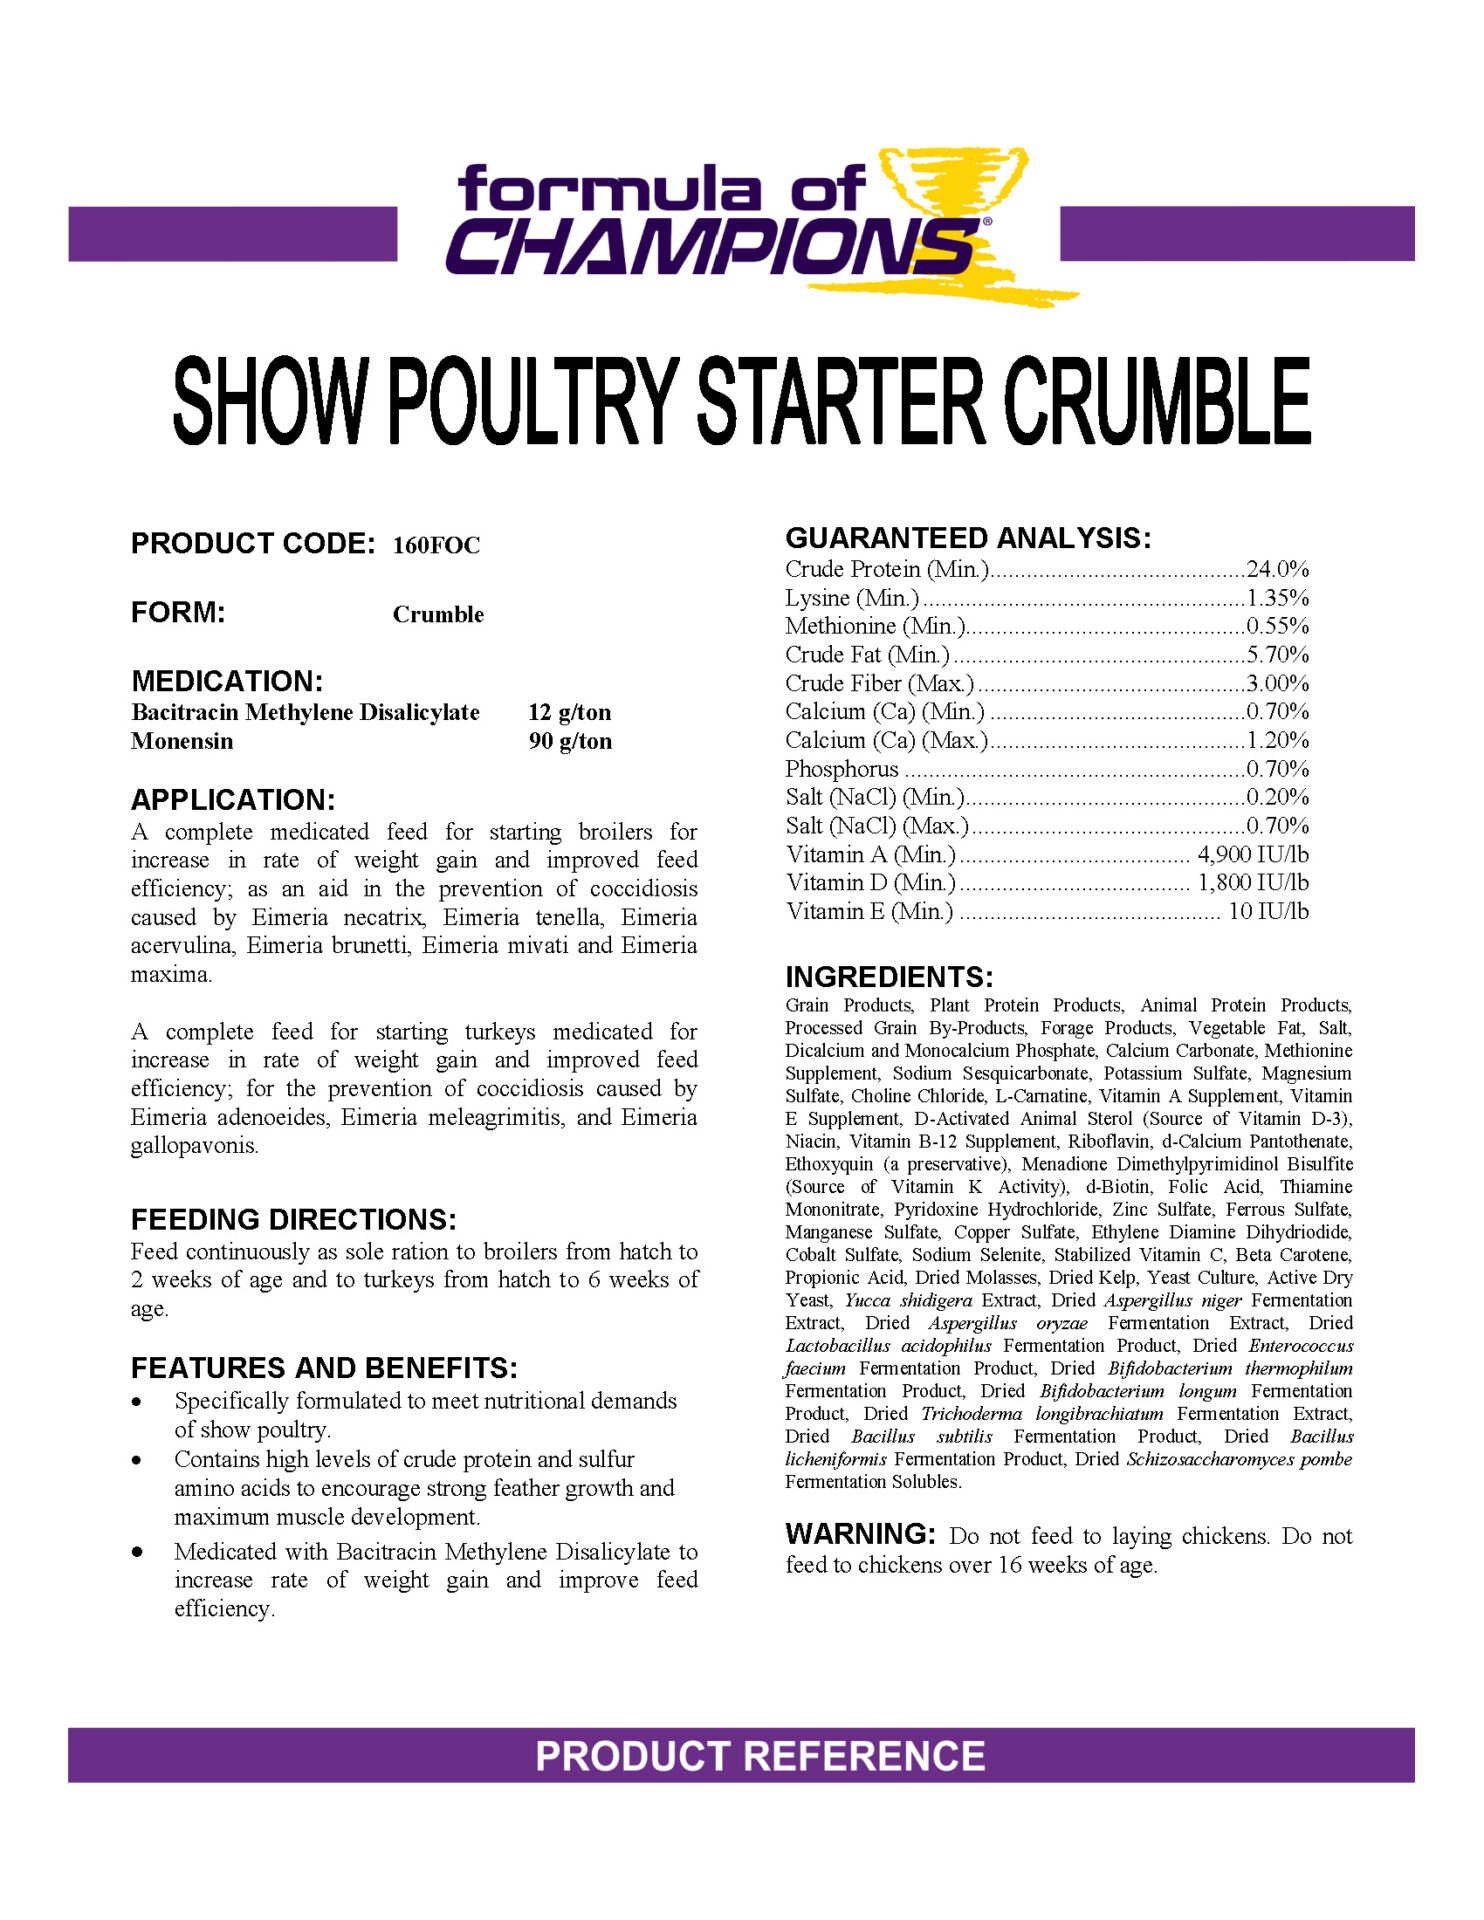 Show Poultry Starter Crumble feed spec sheet